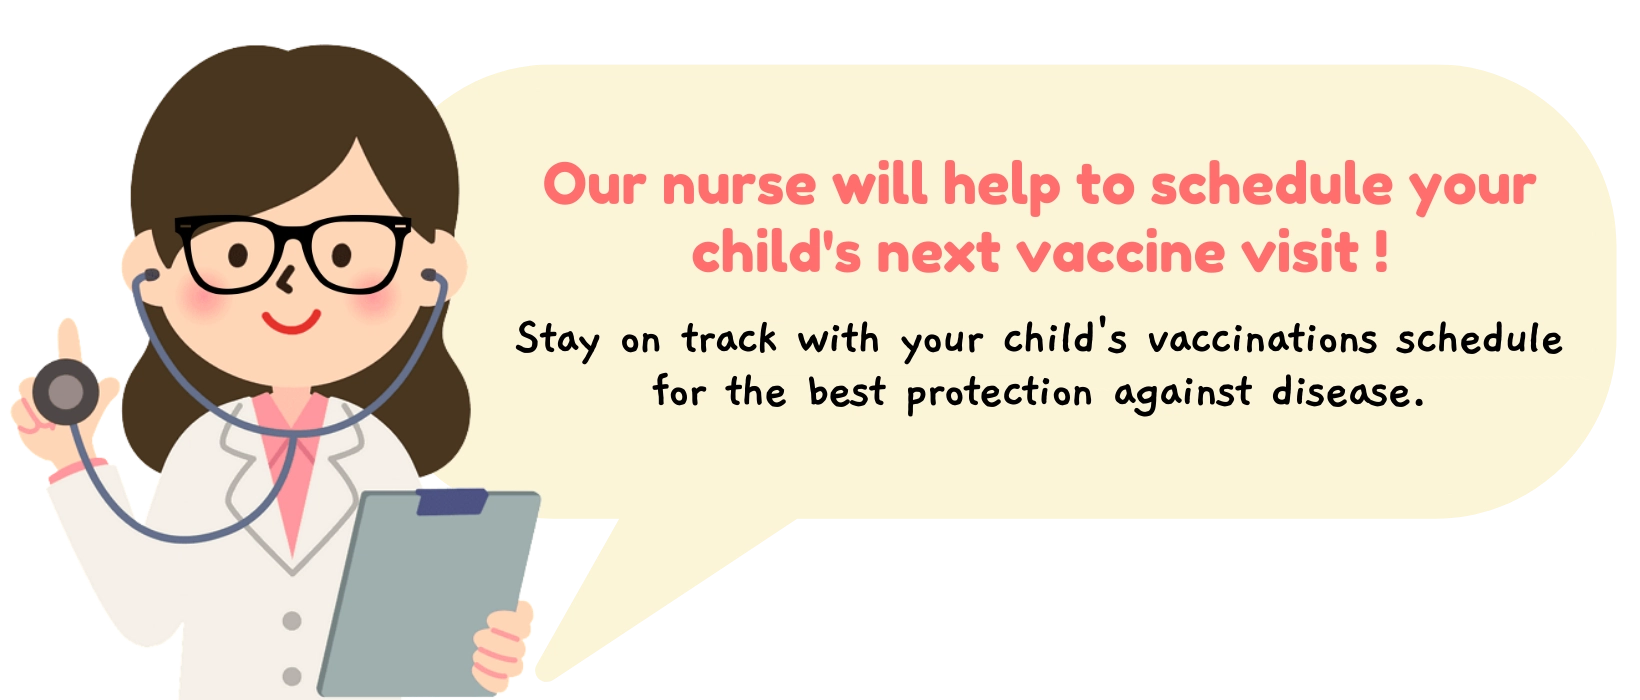 Firststep Child Specialist Friendly Nurse Helping make schedule on vaccination appointment